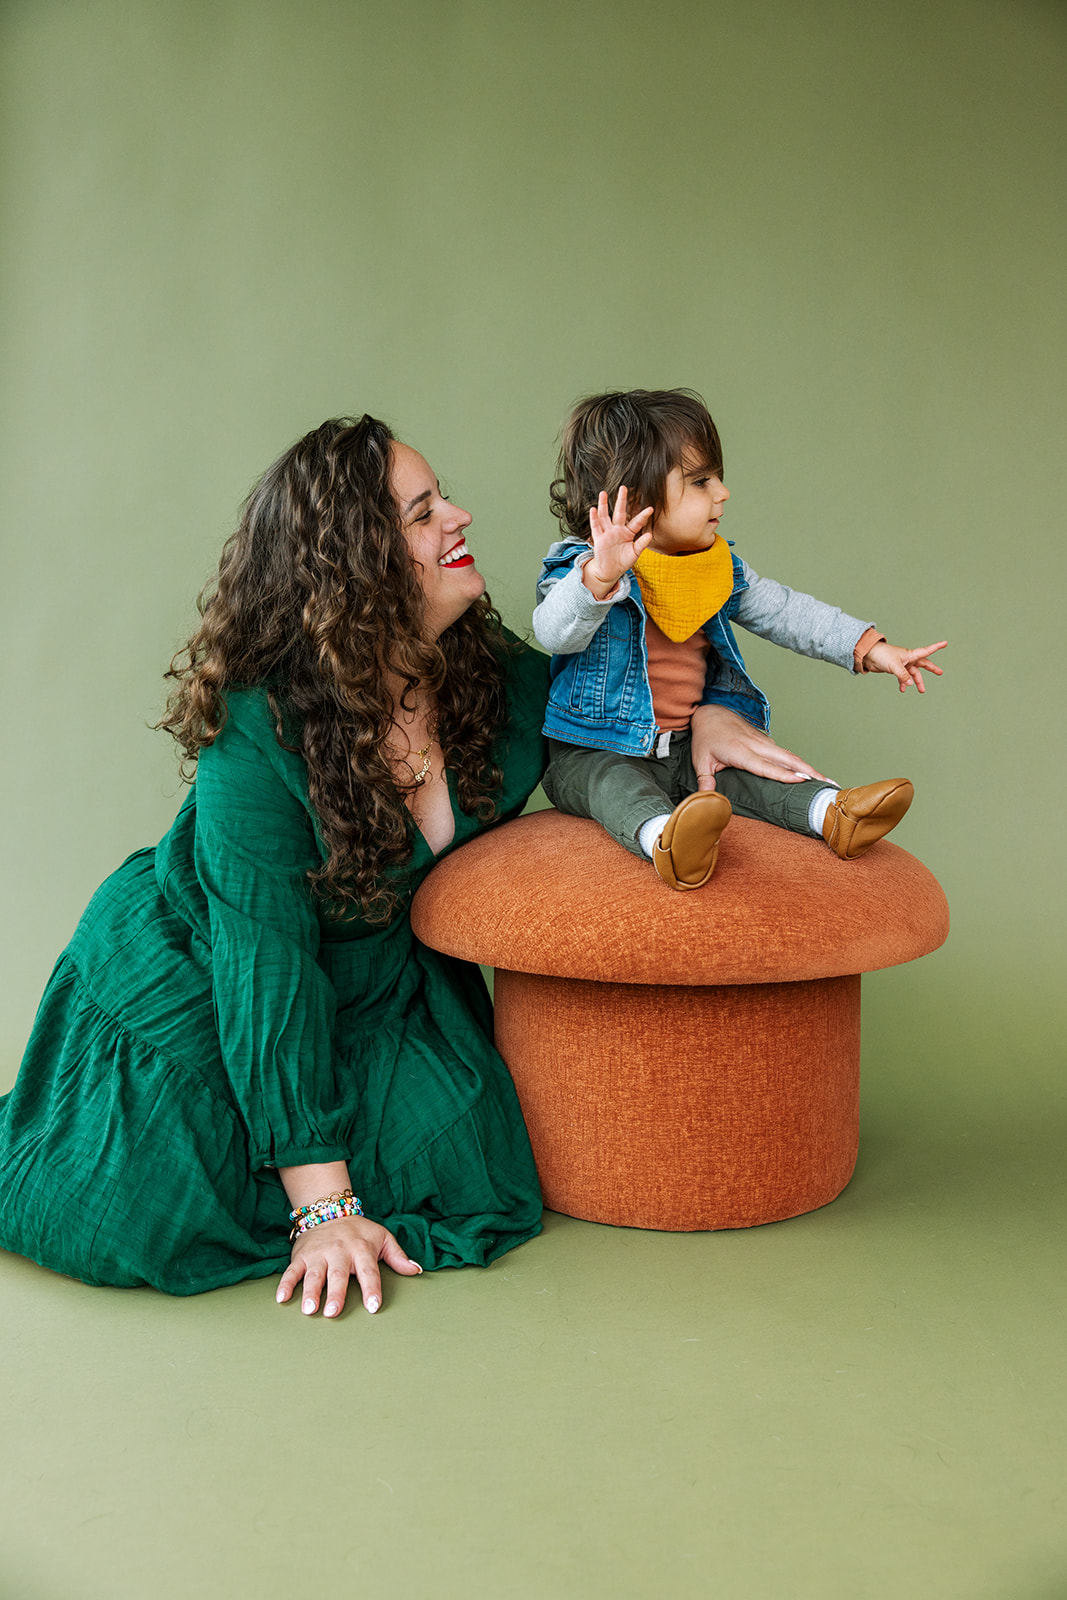 photo of mom in green dress sitting on ground next to toddler sitting on an orange mushroom shaped stool